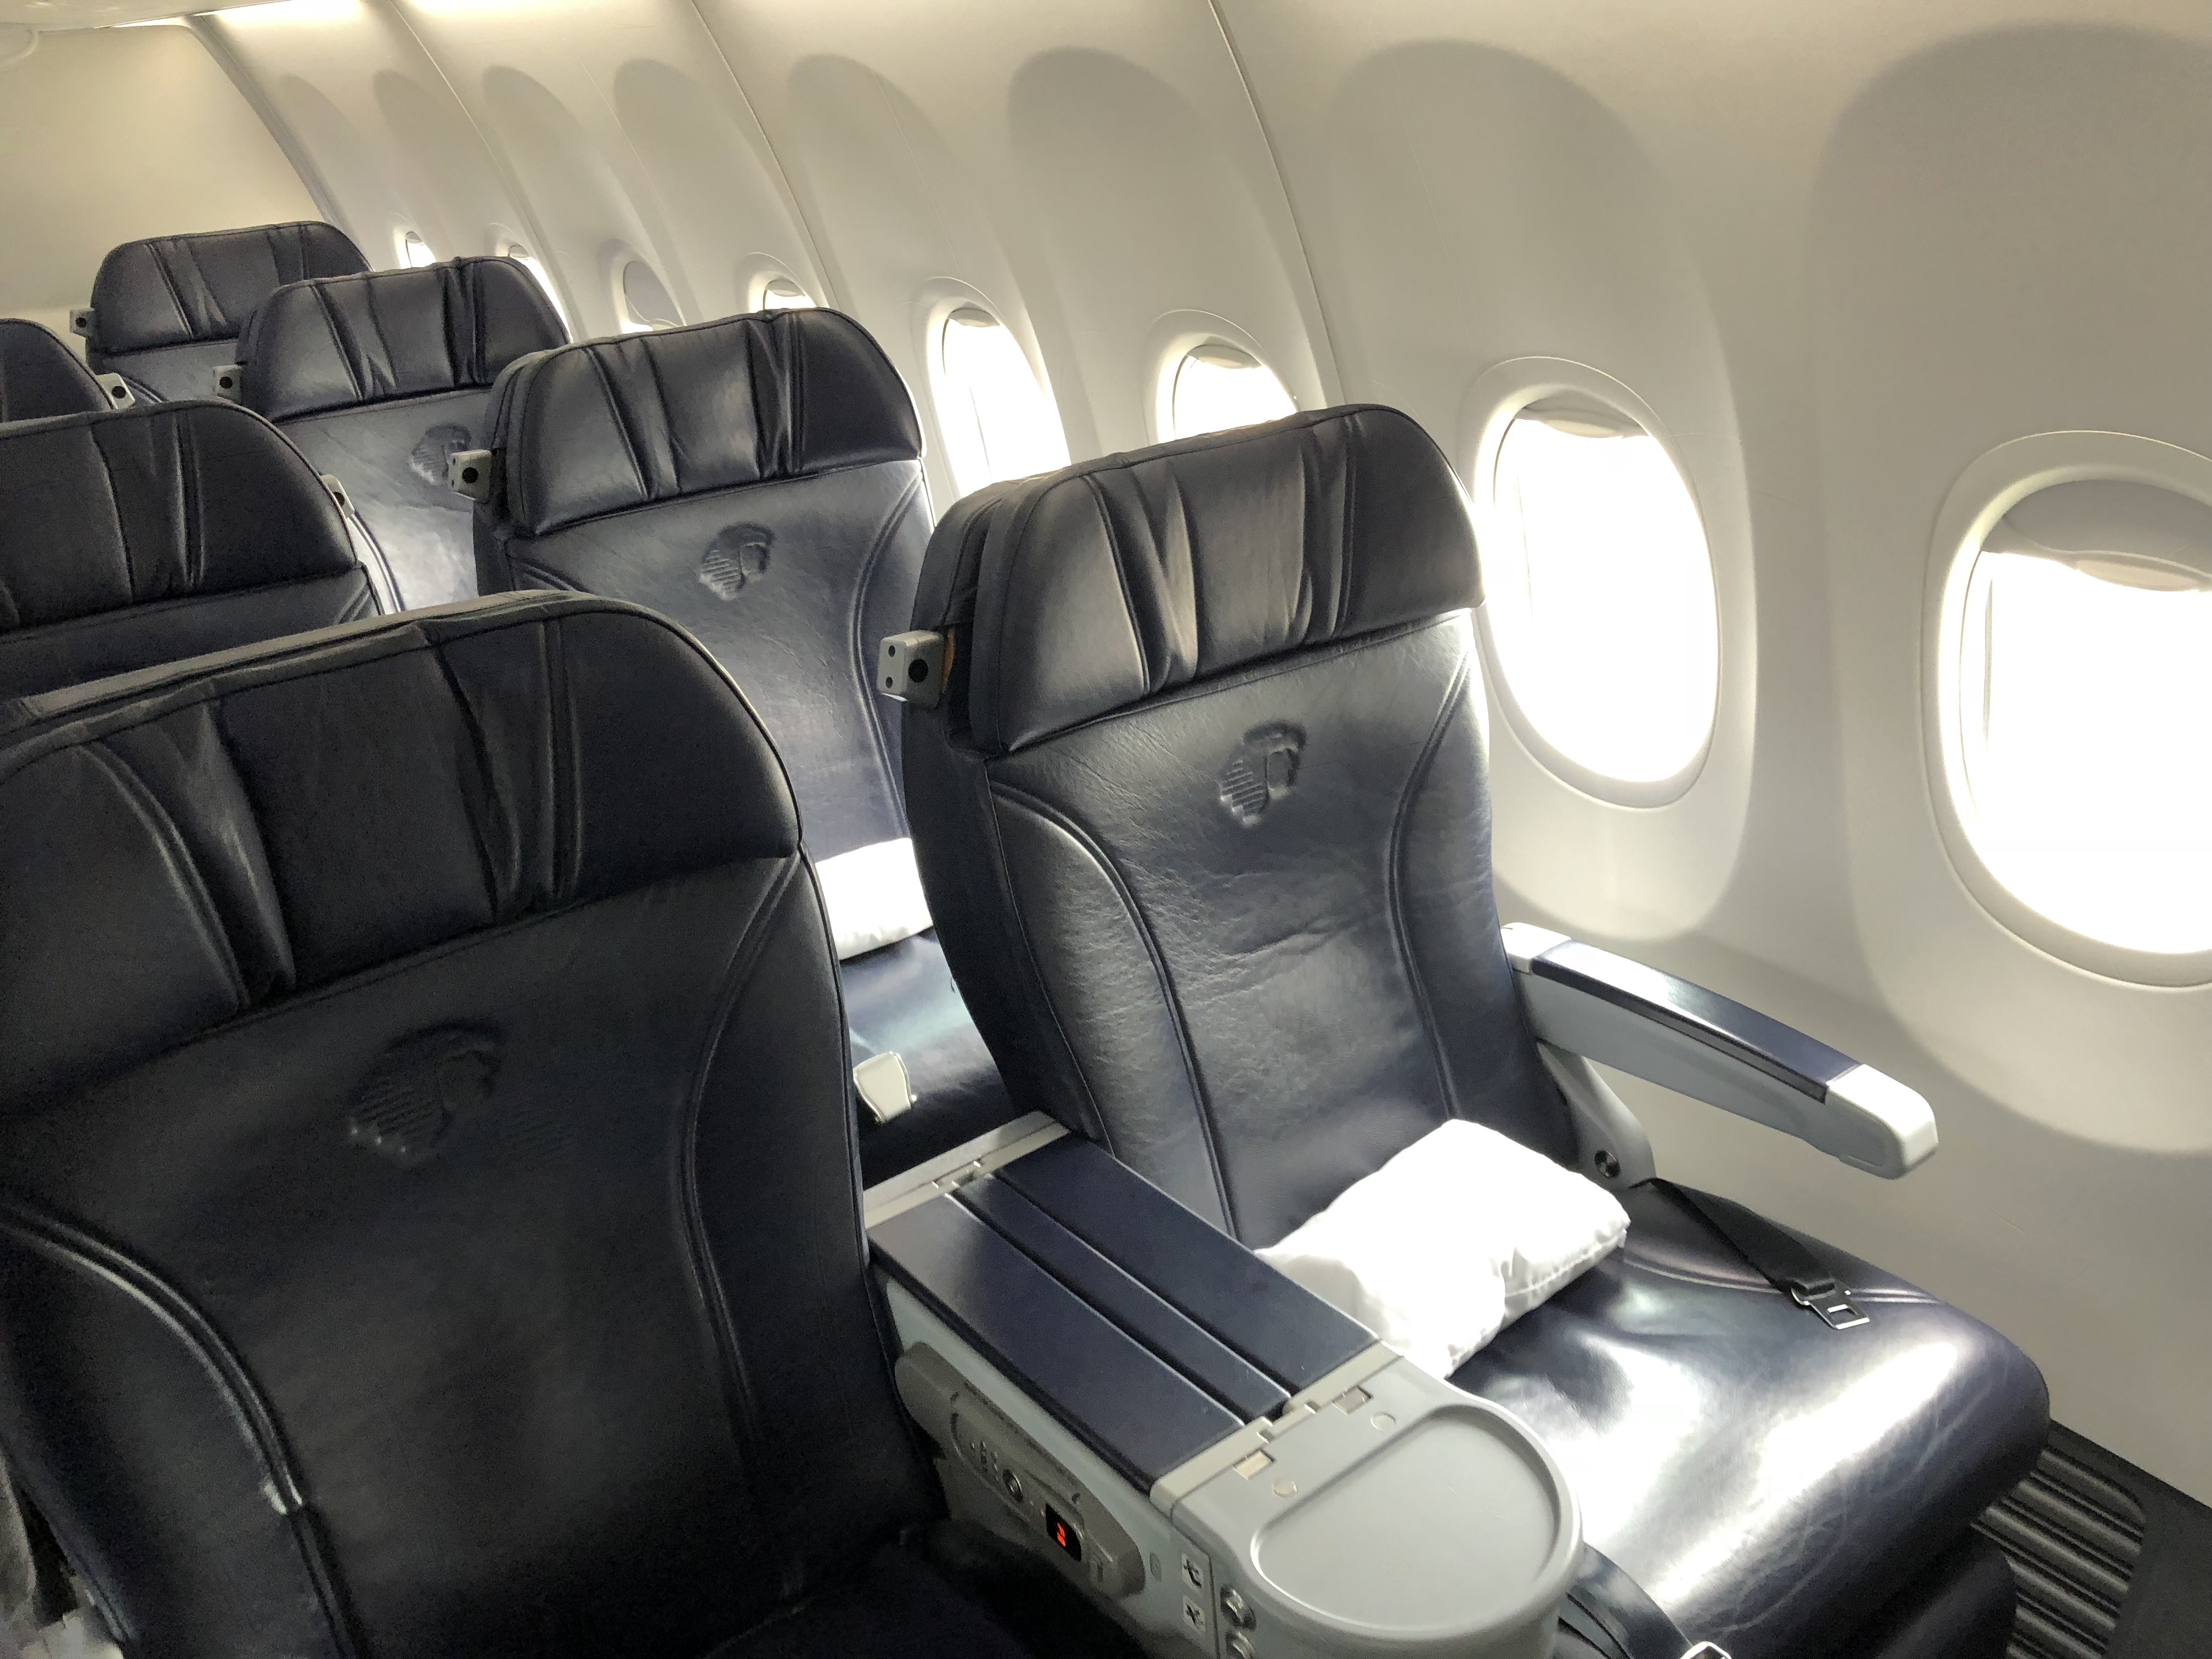 Aeromexico's comfortable Boeing 737-800 business class